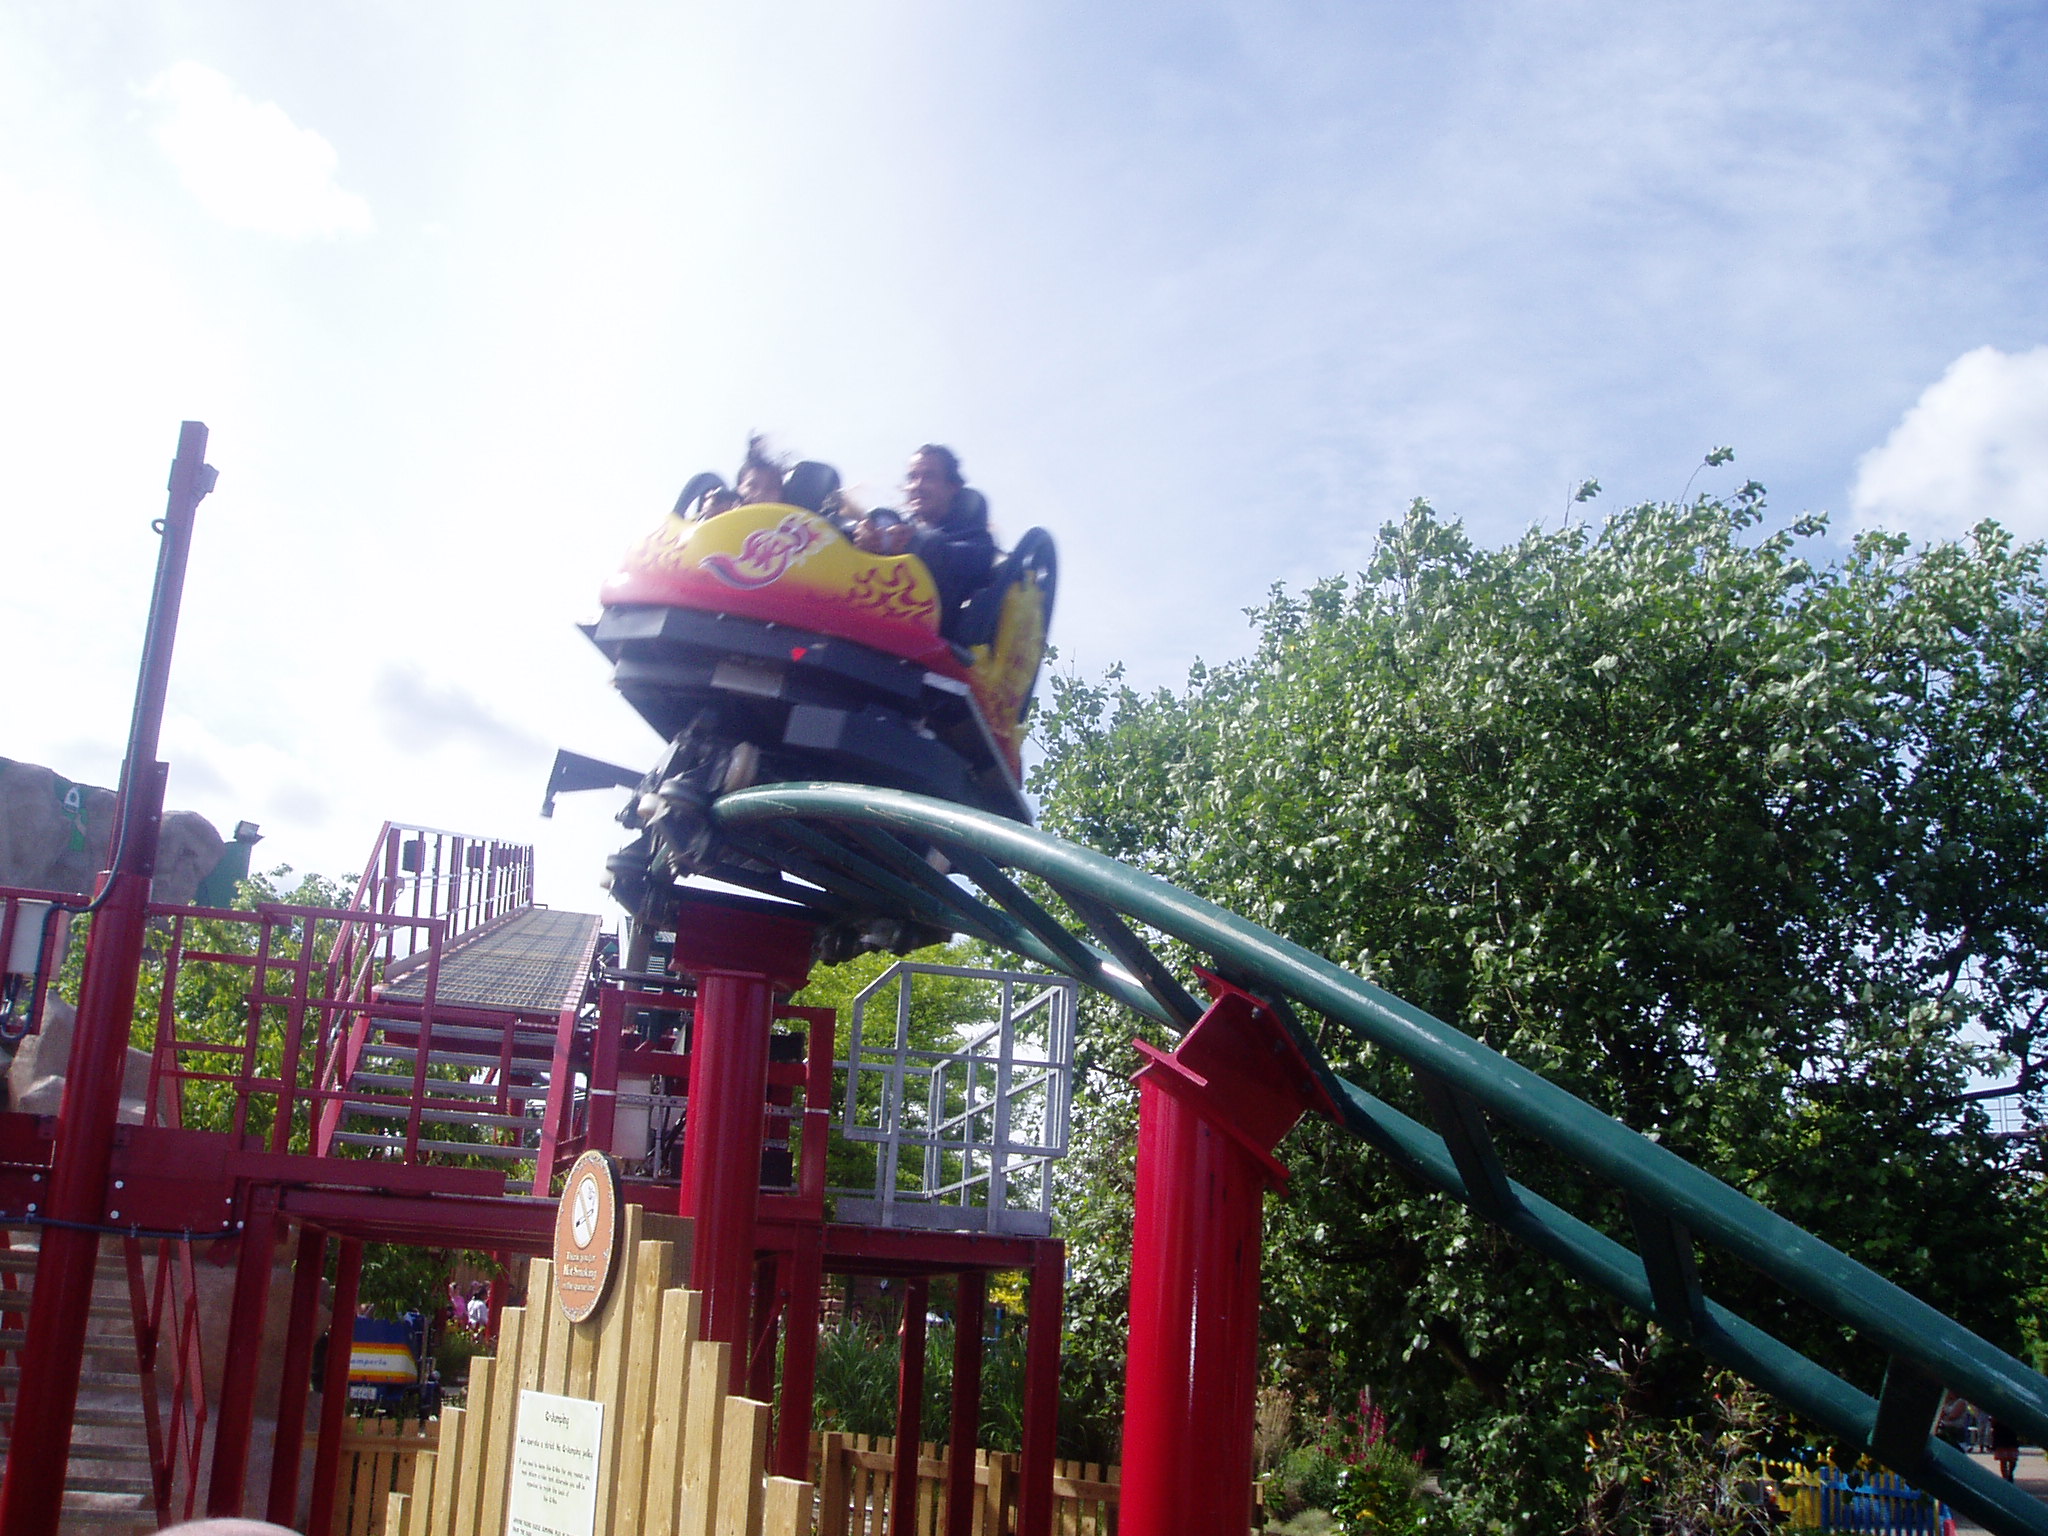 You are currently viewing Dragon’s Fury (Chessington World of Adventures)